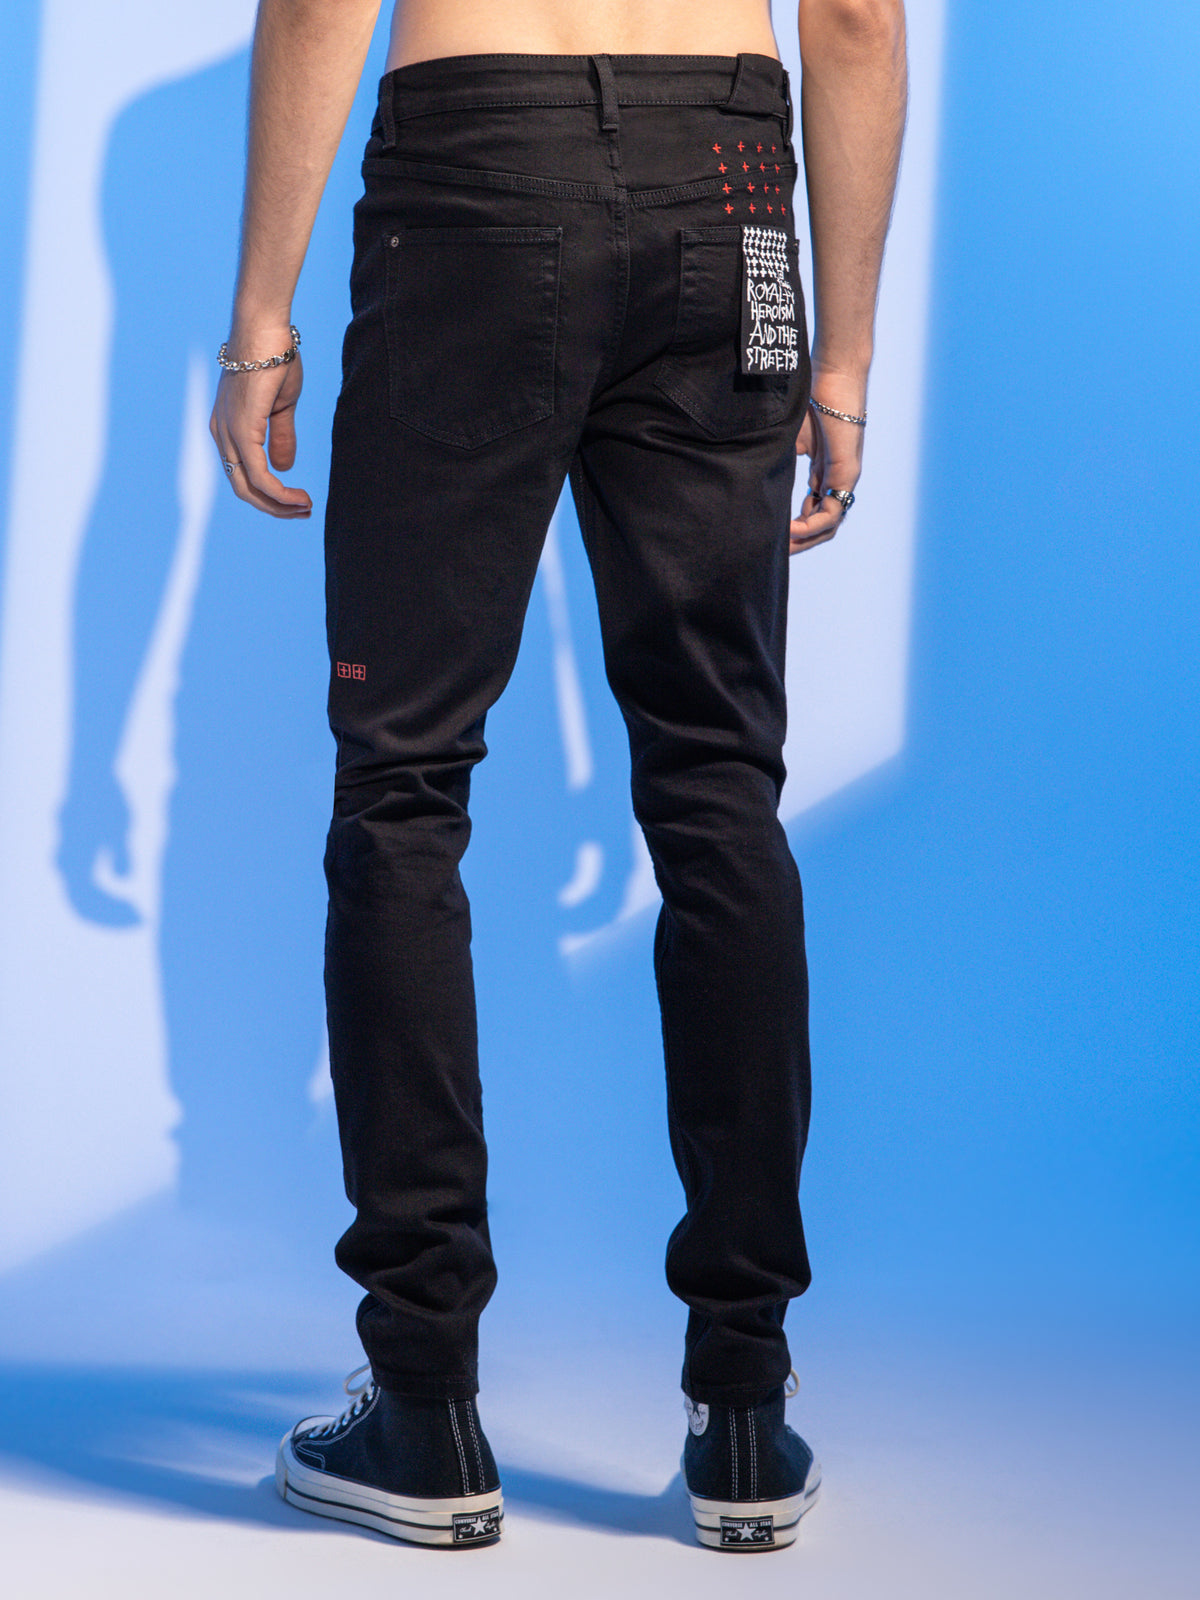 Chitch Slim Fit Jeans in Laid Back Black